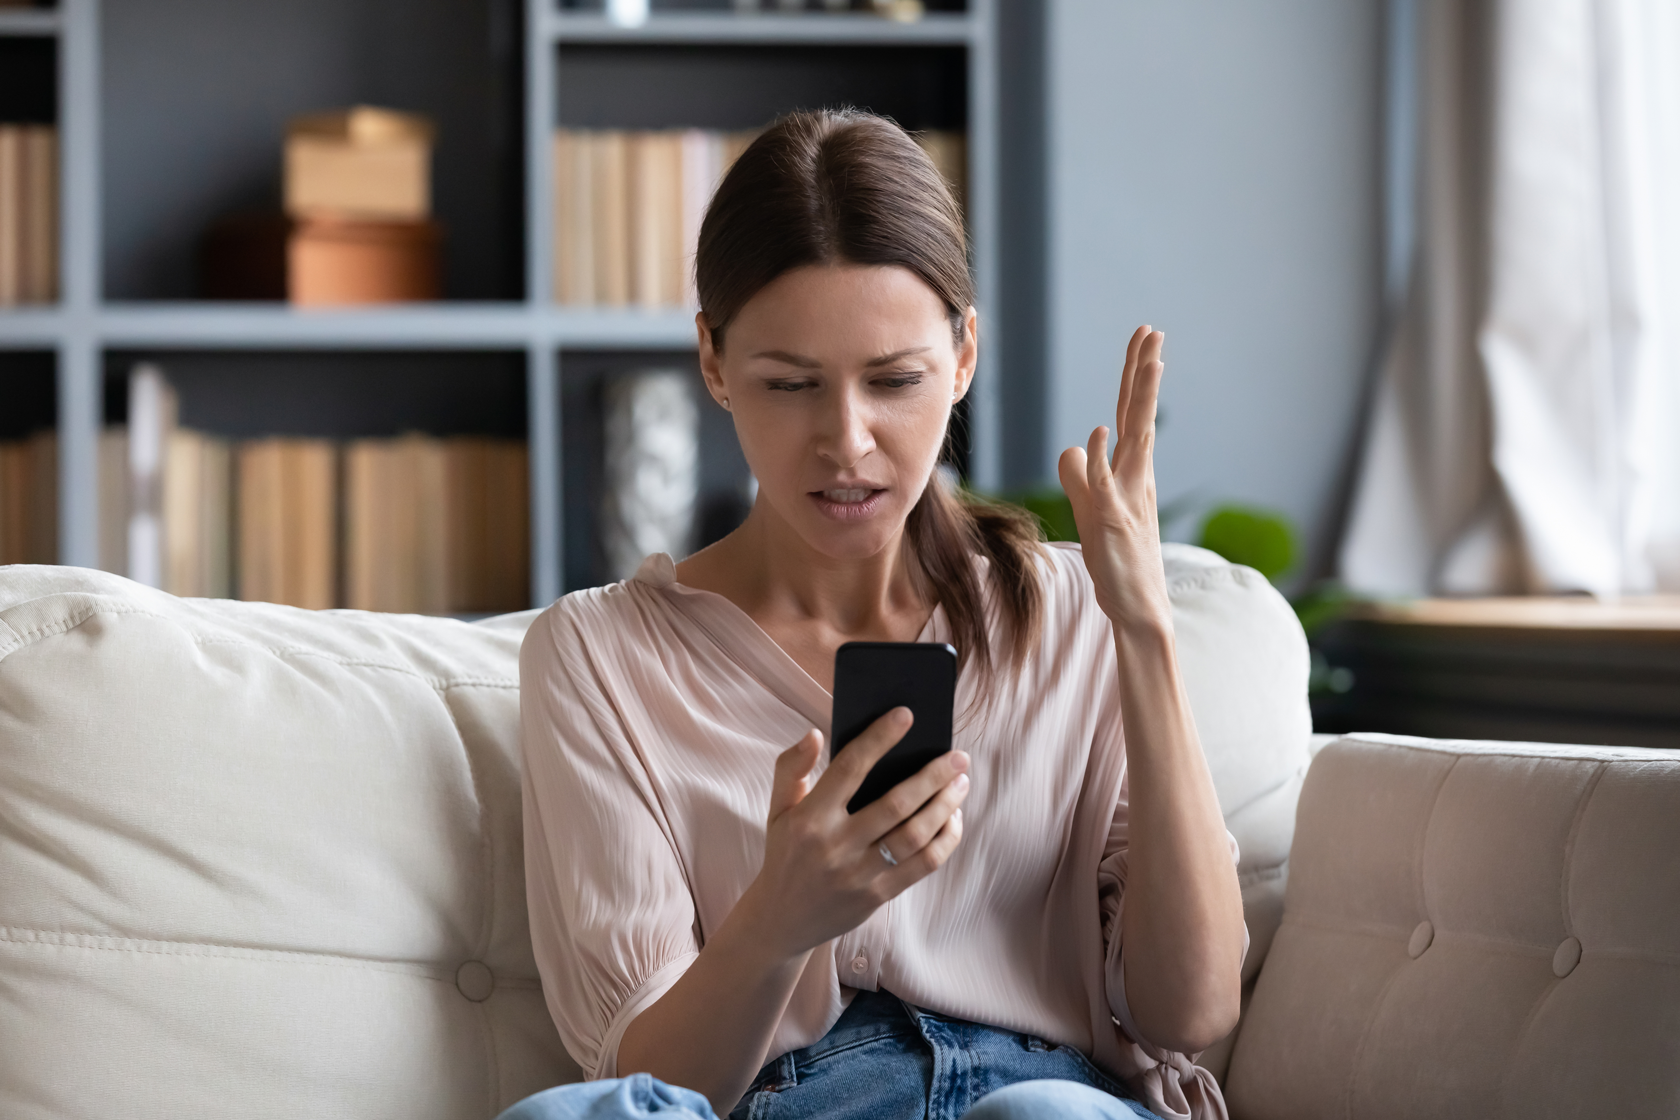 A frustrated woman sitting on a living room sofa looking at her smartphone.